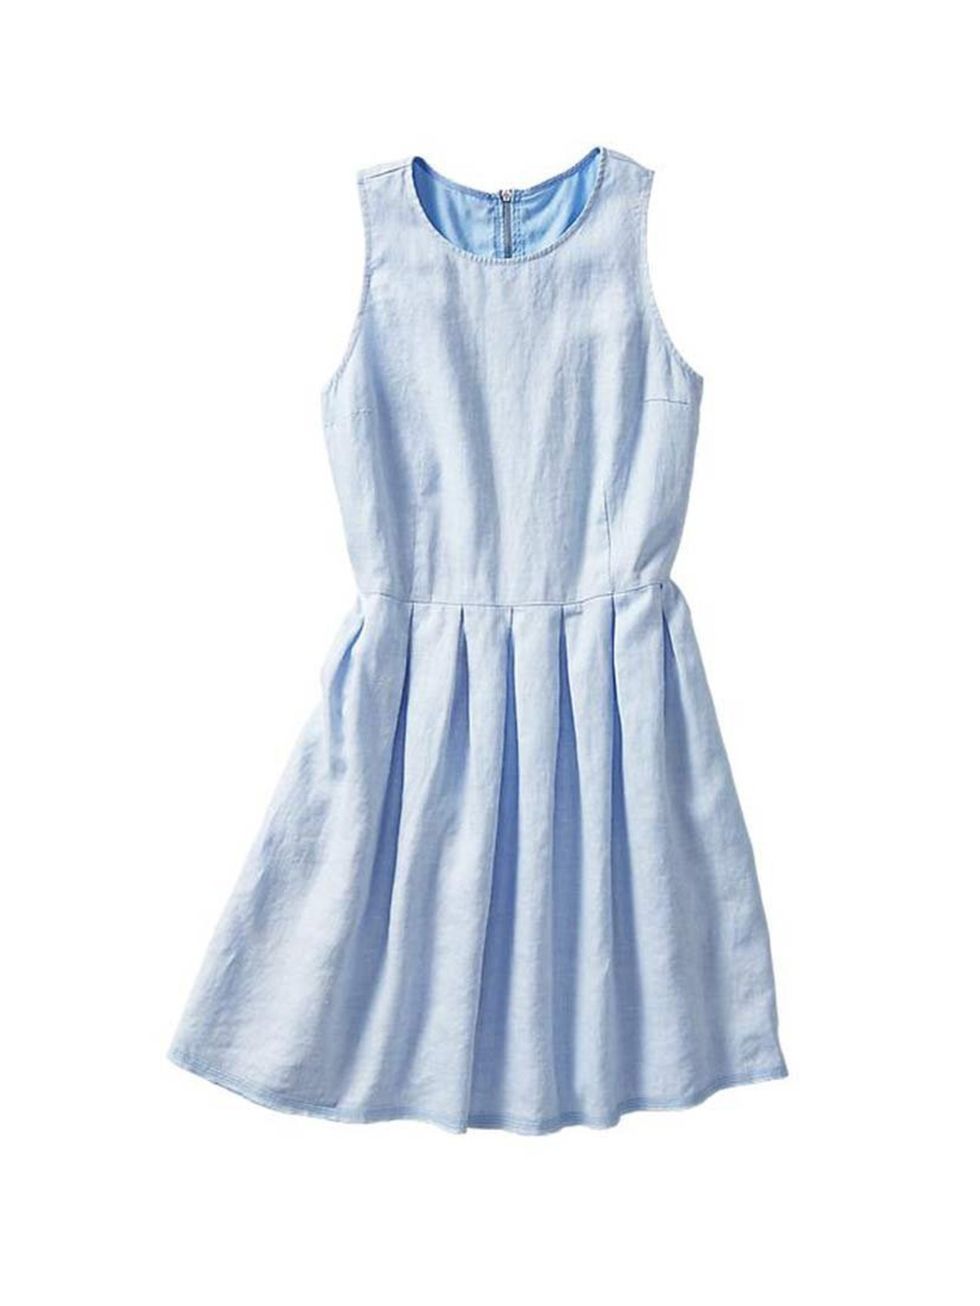 <p>Market & Retail Editor Harriet Stewart will wear this feminine dress with chunky trainers and a baseball jacket this summer.</p><p><a href="http://www.gap.co.uk/browse/product.do?cid=1011935&vid=1&pid=000960458003">Gap</a> dress, £44.95</p>